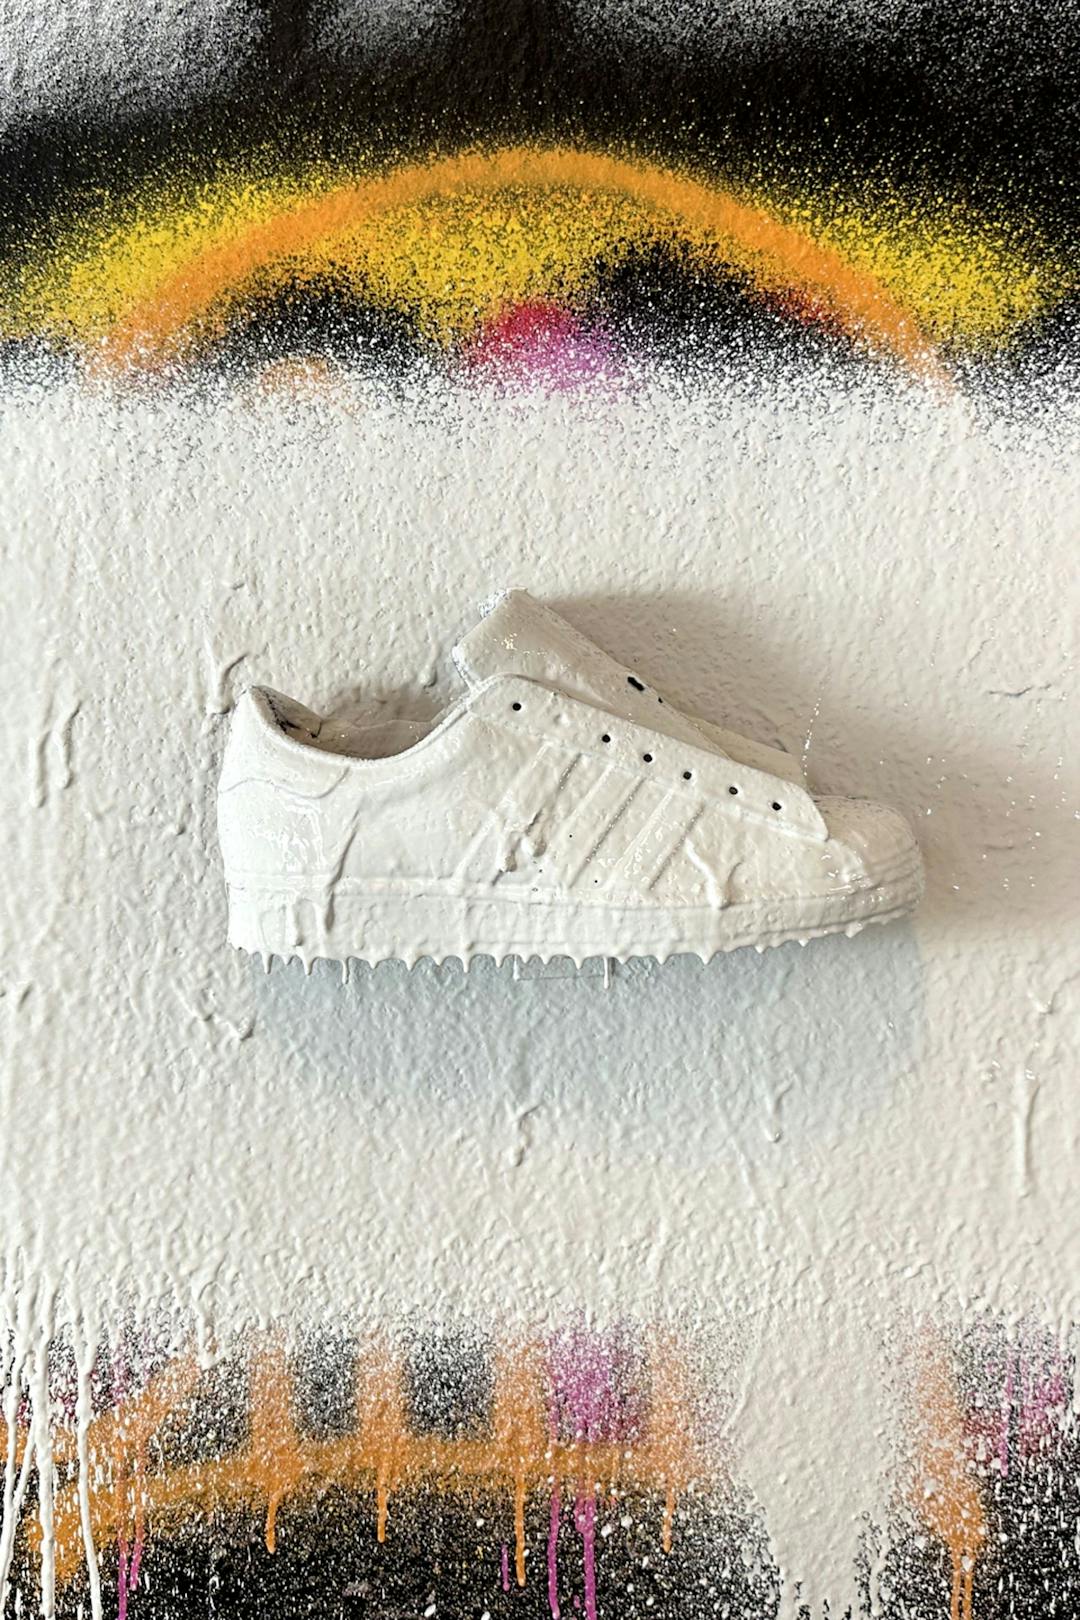 Shoe painted all white to conceal illustrations.